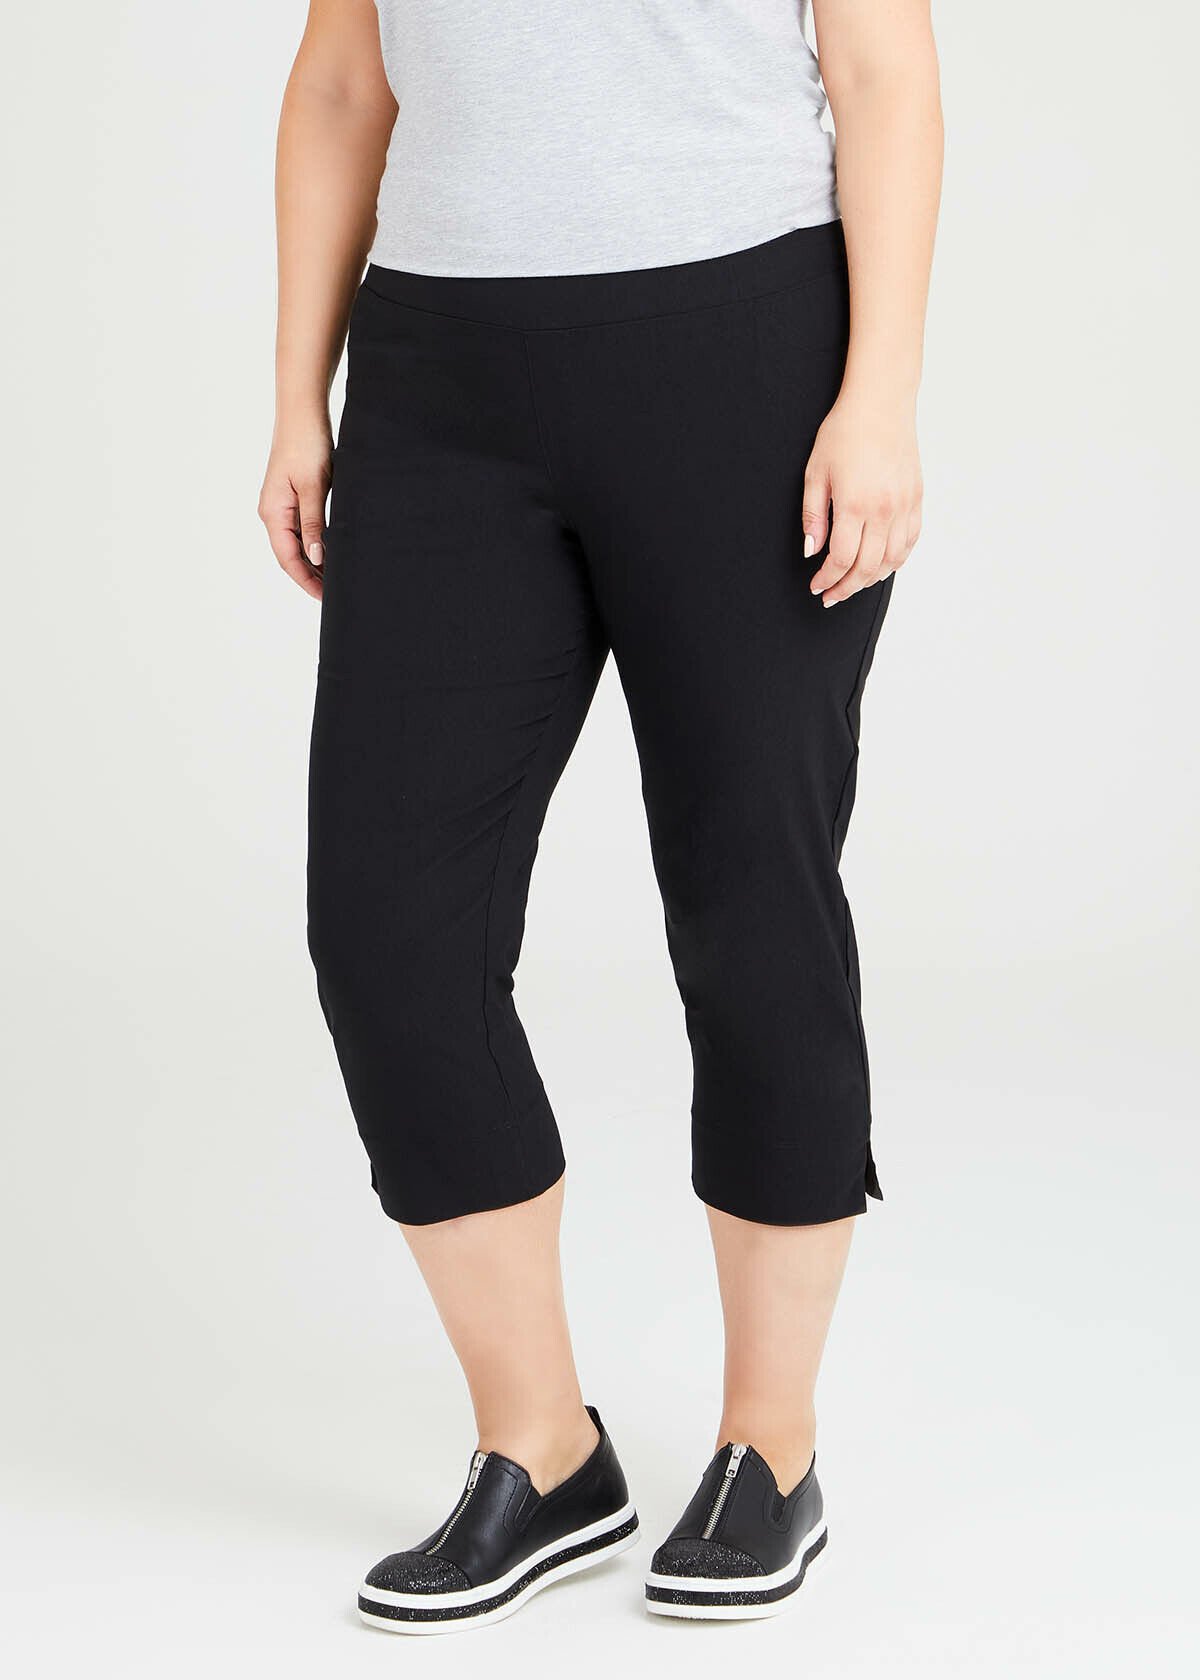 PandaWears Womens Big Size 34th  Women Black Capri  Buy PandaWears  Womens Big Size 34th  Women Black Capri Online at Best Prices in India   Flipkartcom